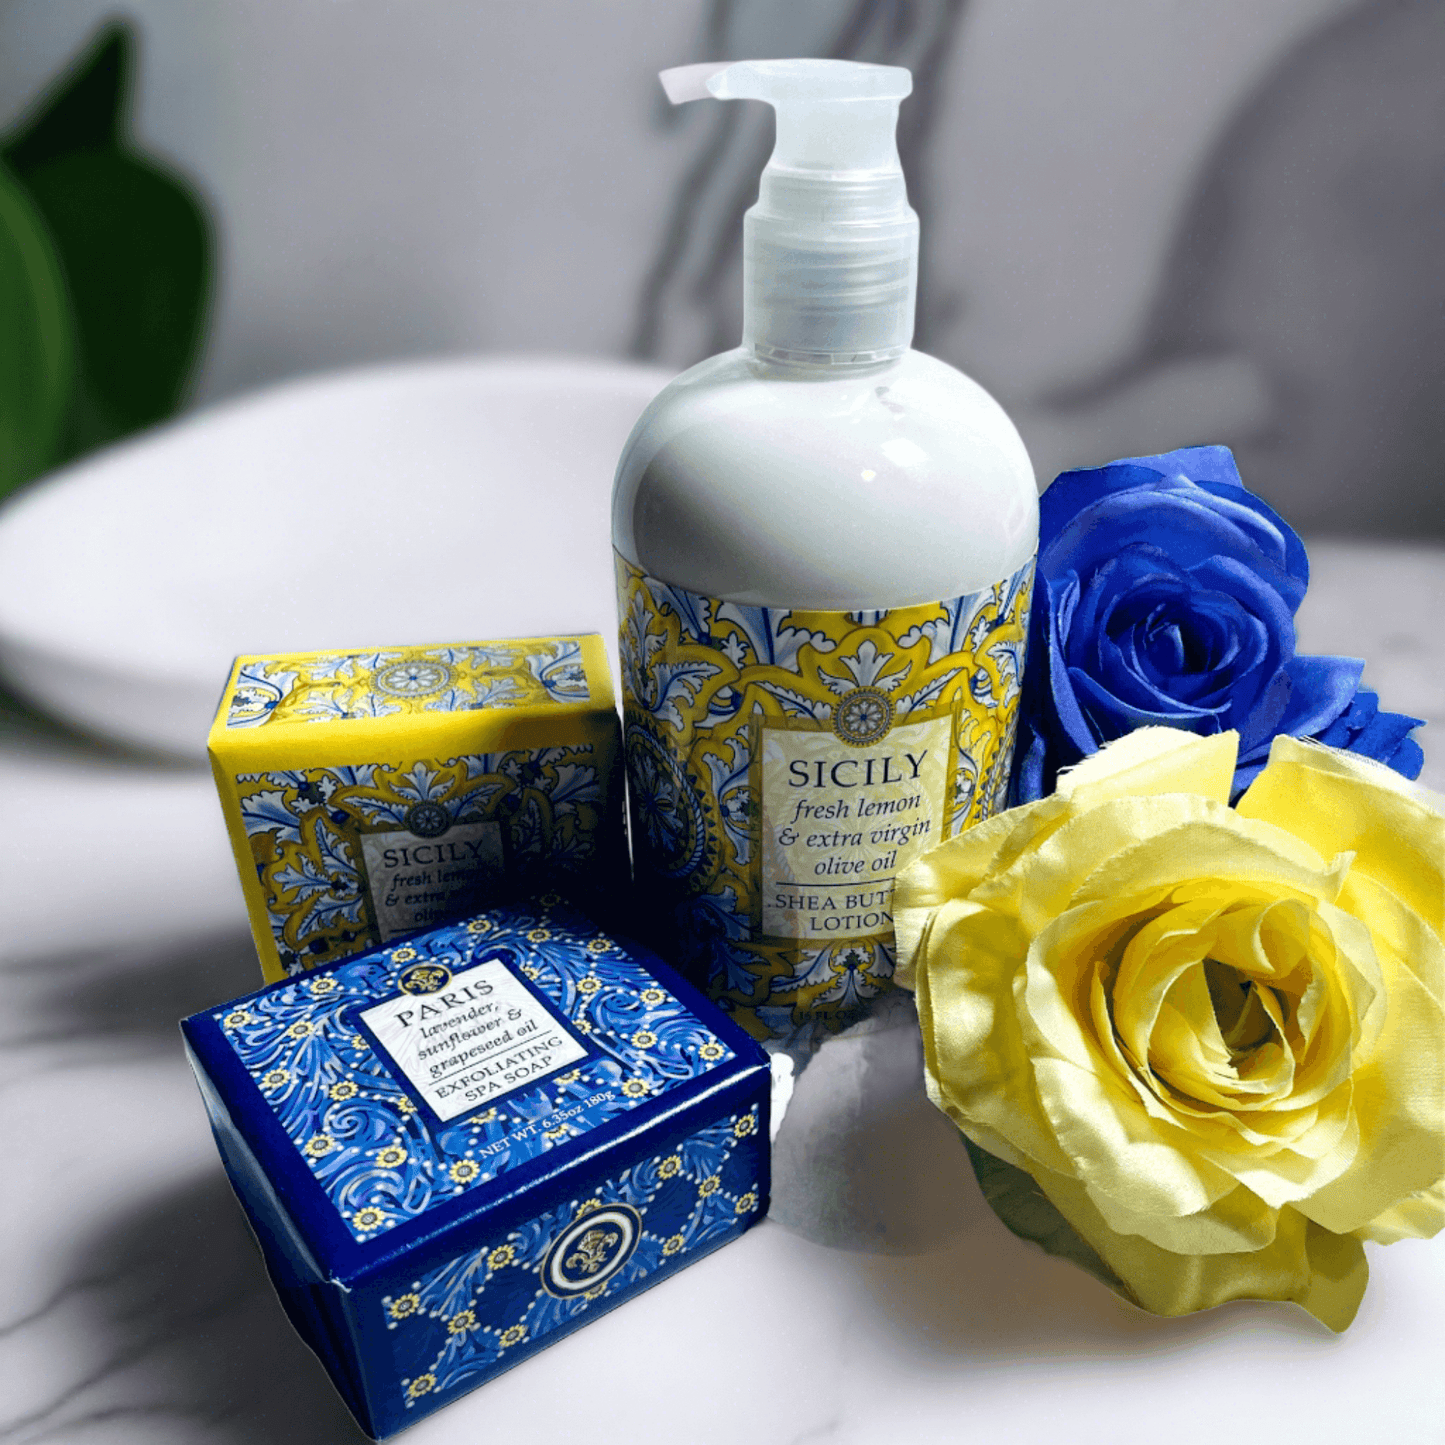 Elegant bath and body products featuring the Sicily Collection from Essentialgifting.com. The image showcases a bottle of lotion, a decorative box, and vibrant yellow and blue flowers, creating a luxurious, Mediterranean-inspired display.